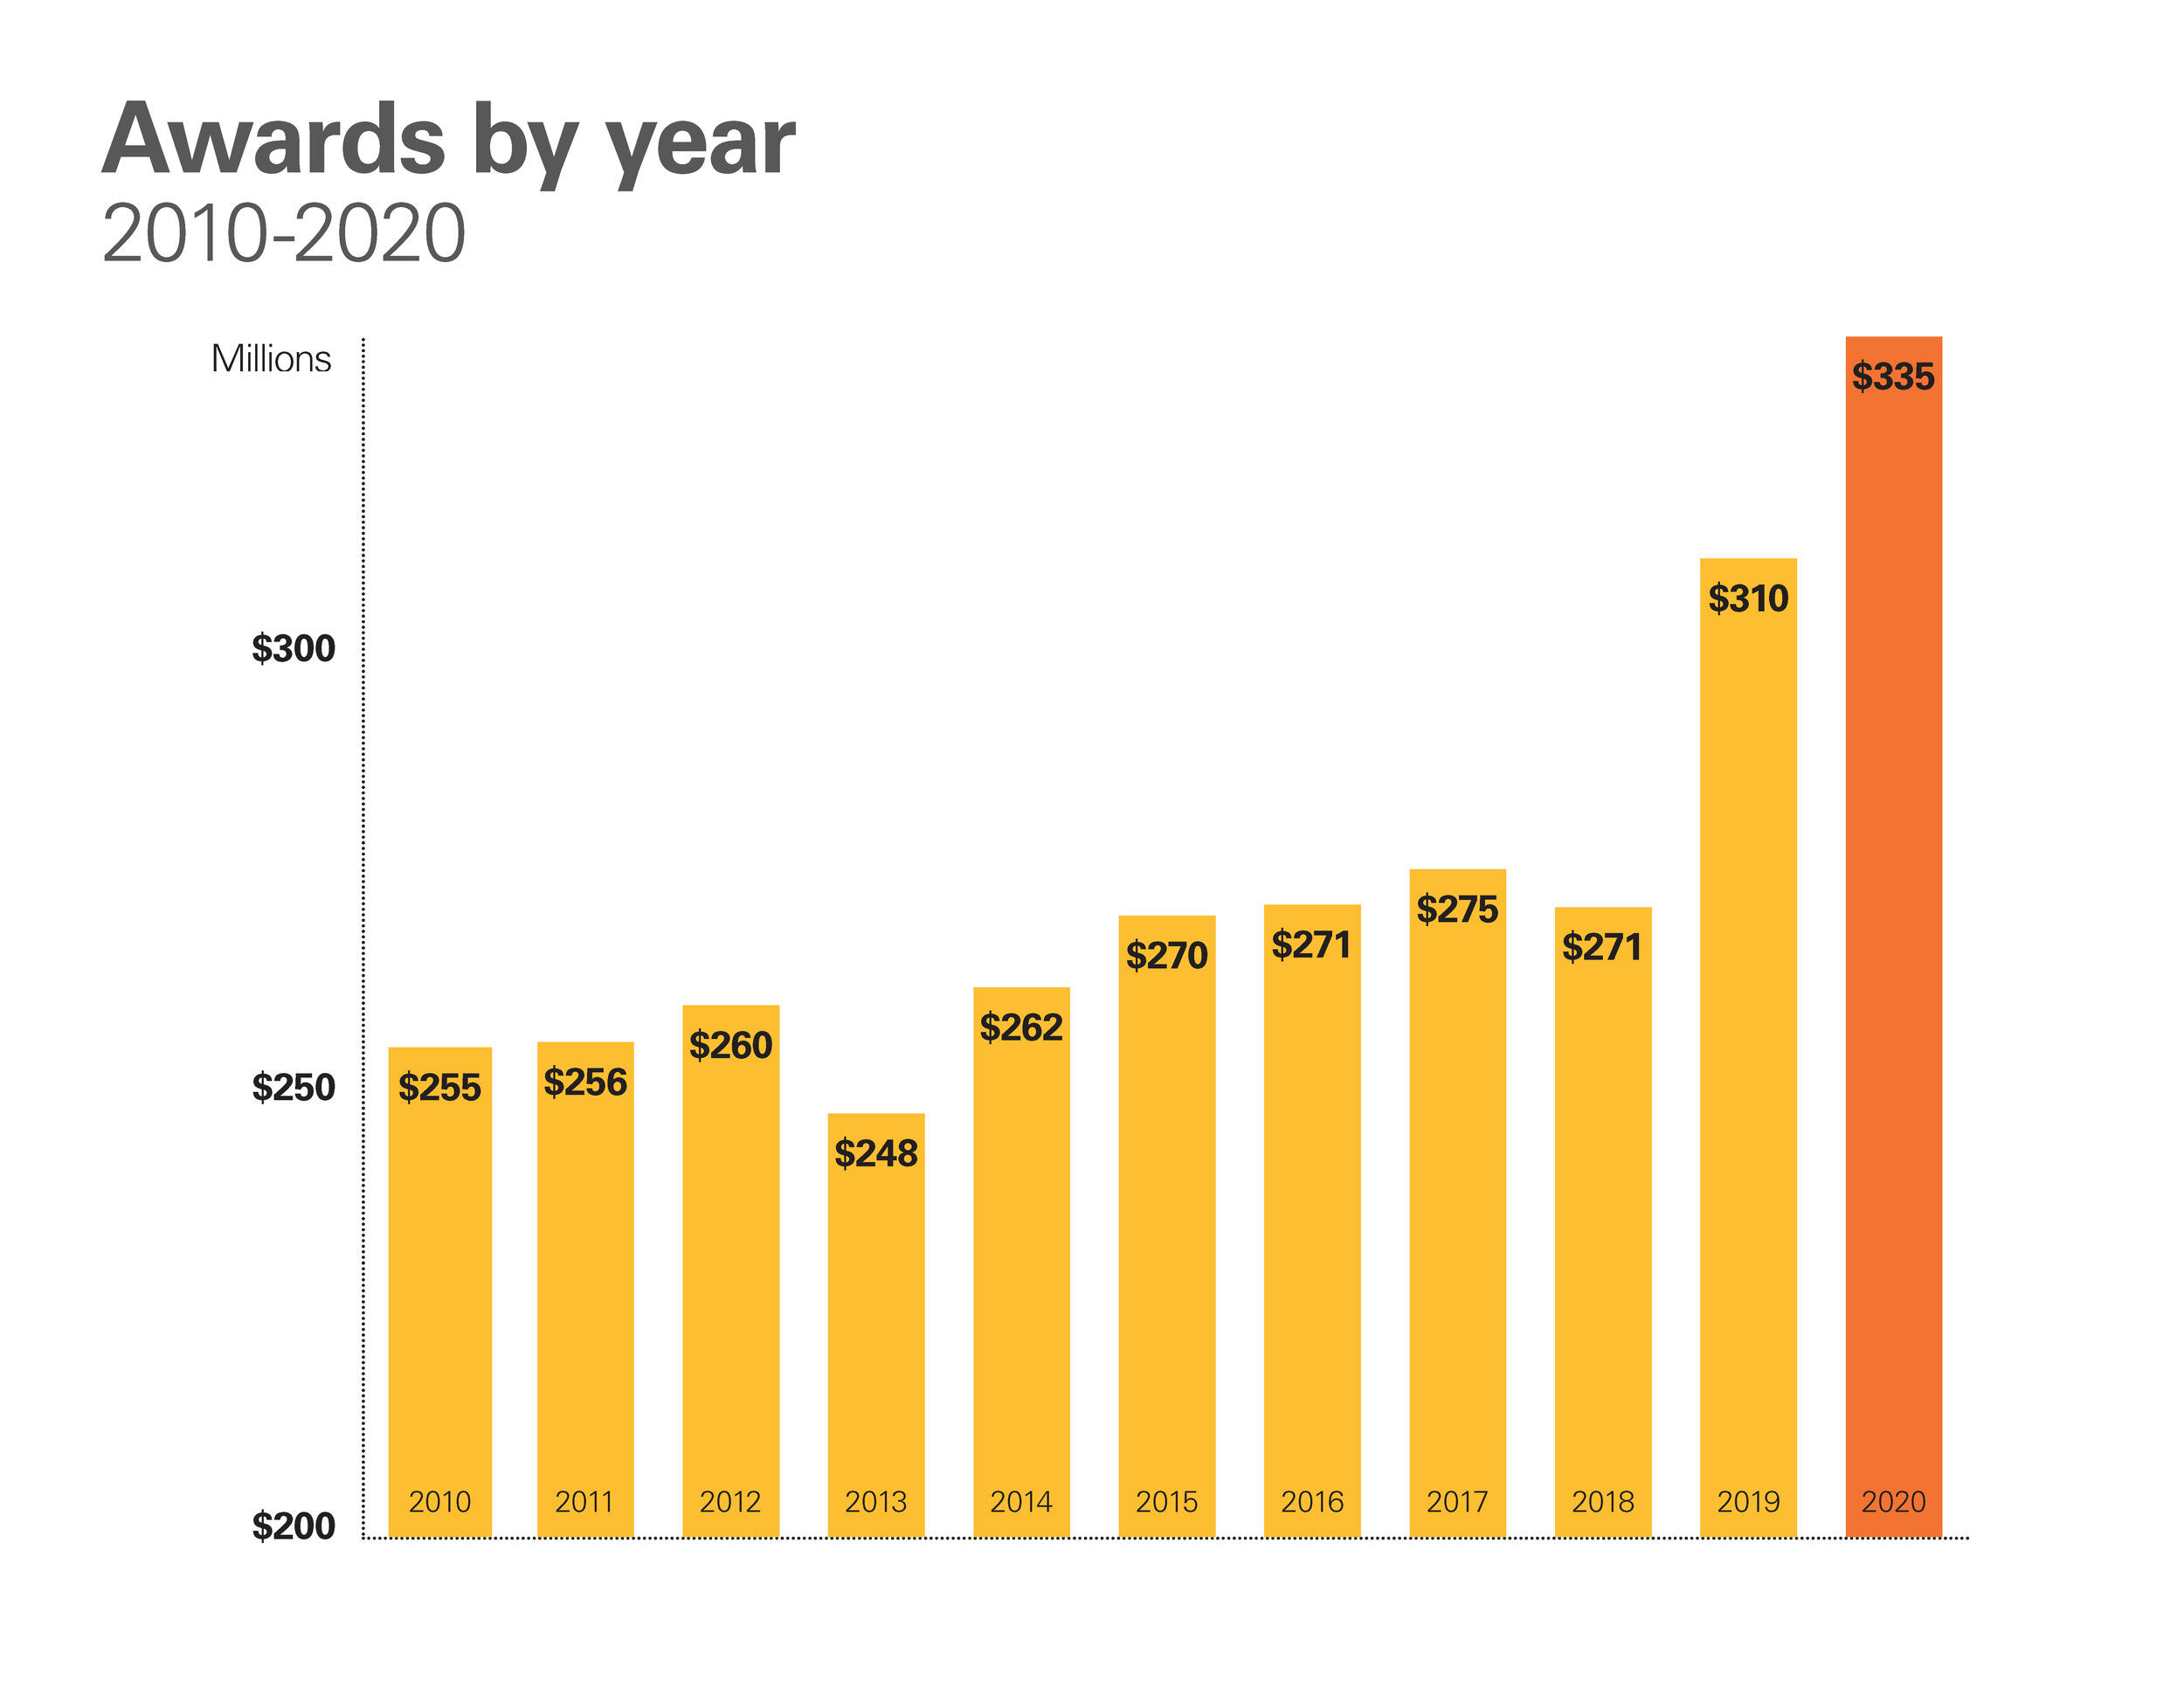 Bar graph depicting the total number of awards from 2010-2020.